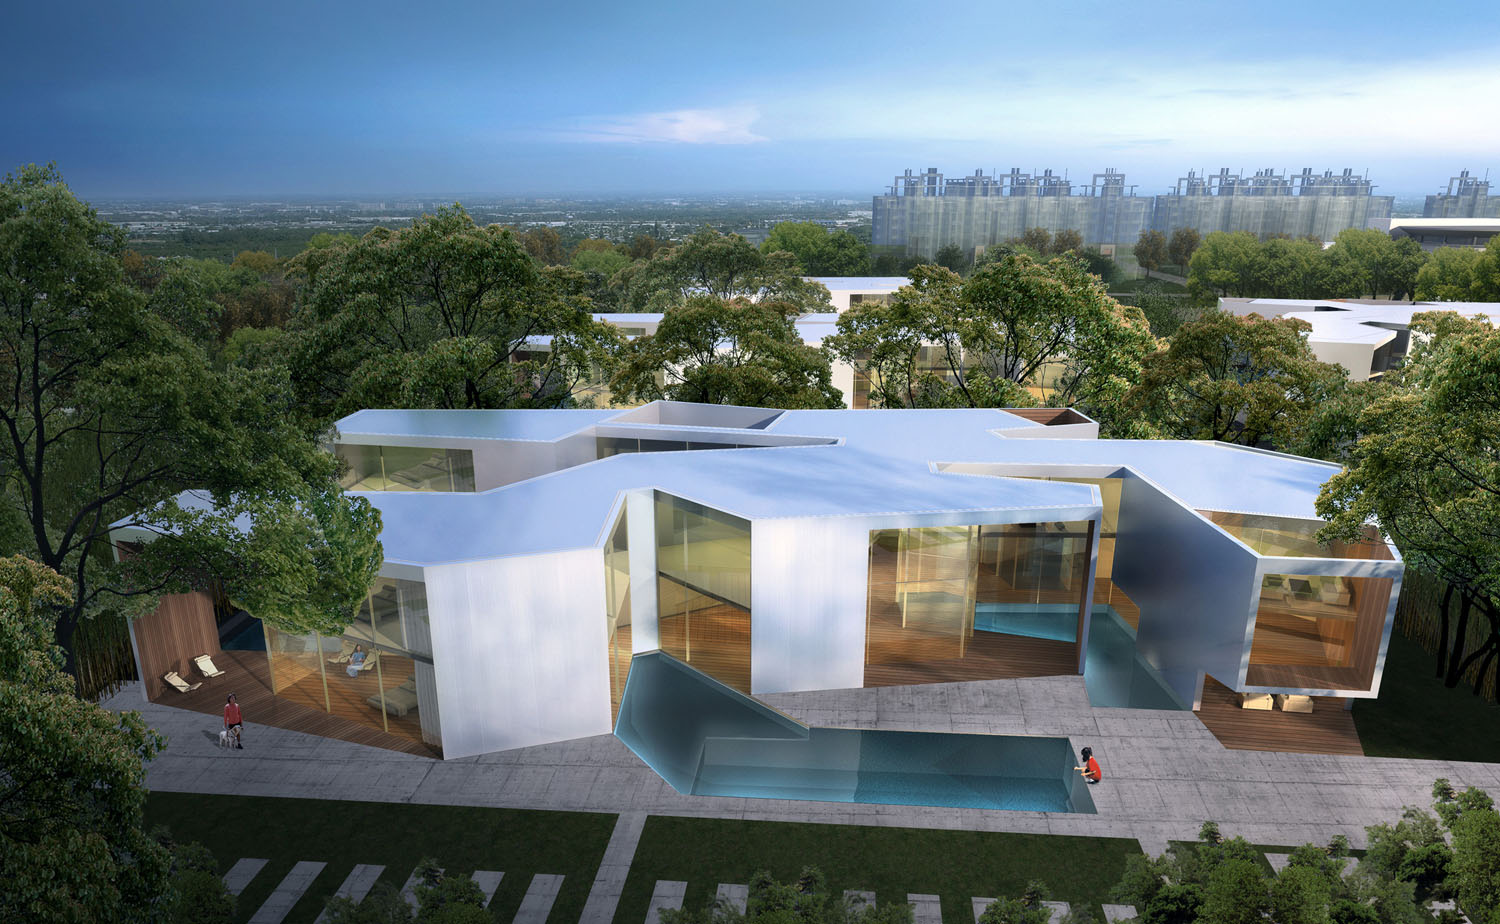 Shanghai Flower Garden Square design by Real Time Architecture (RTA-Office)